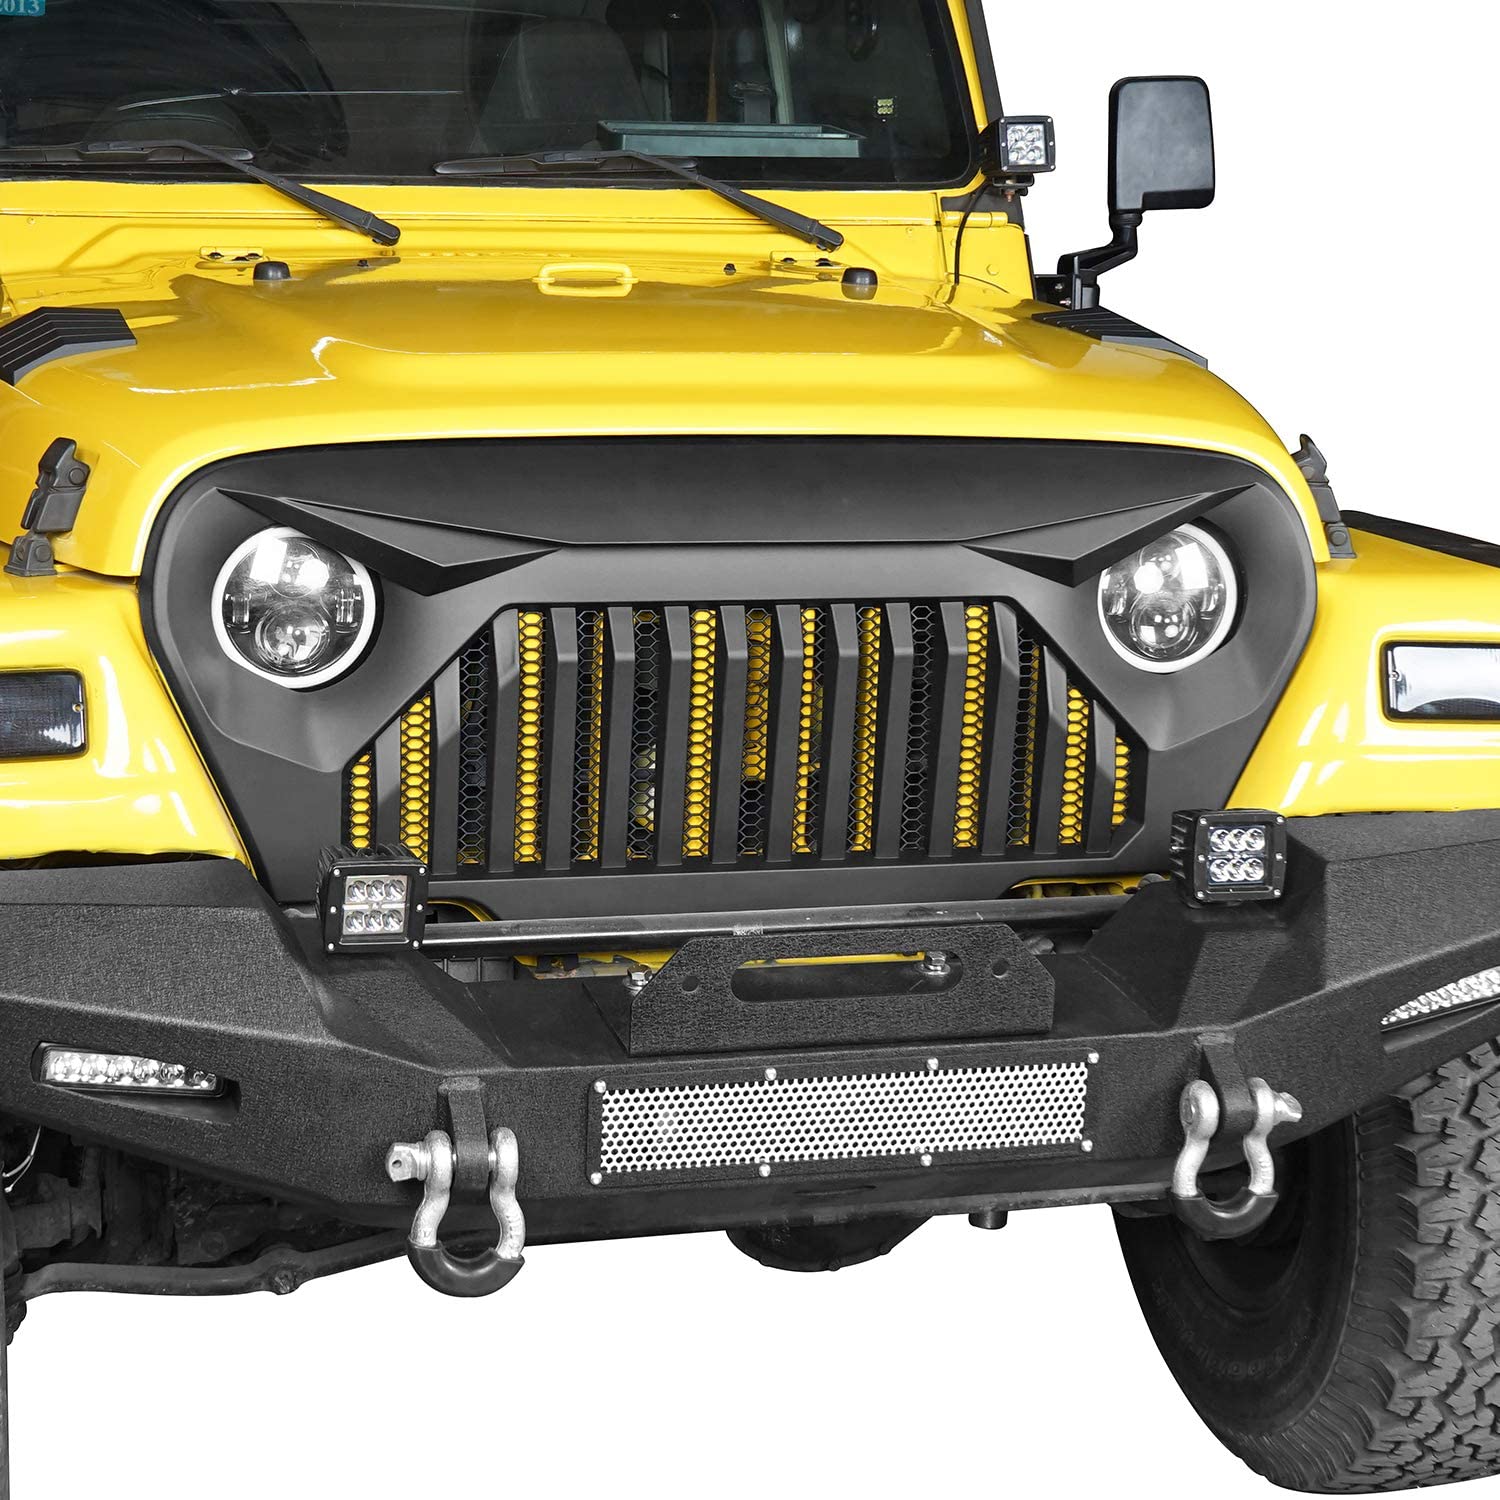 Jeep W 1997-2006 TJ LJ F G G C V G w/Mesh Is (M B): Ae Order online  excellent customer service Affordable shipping 